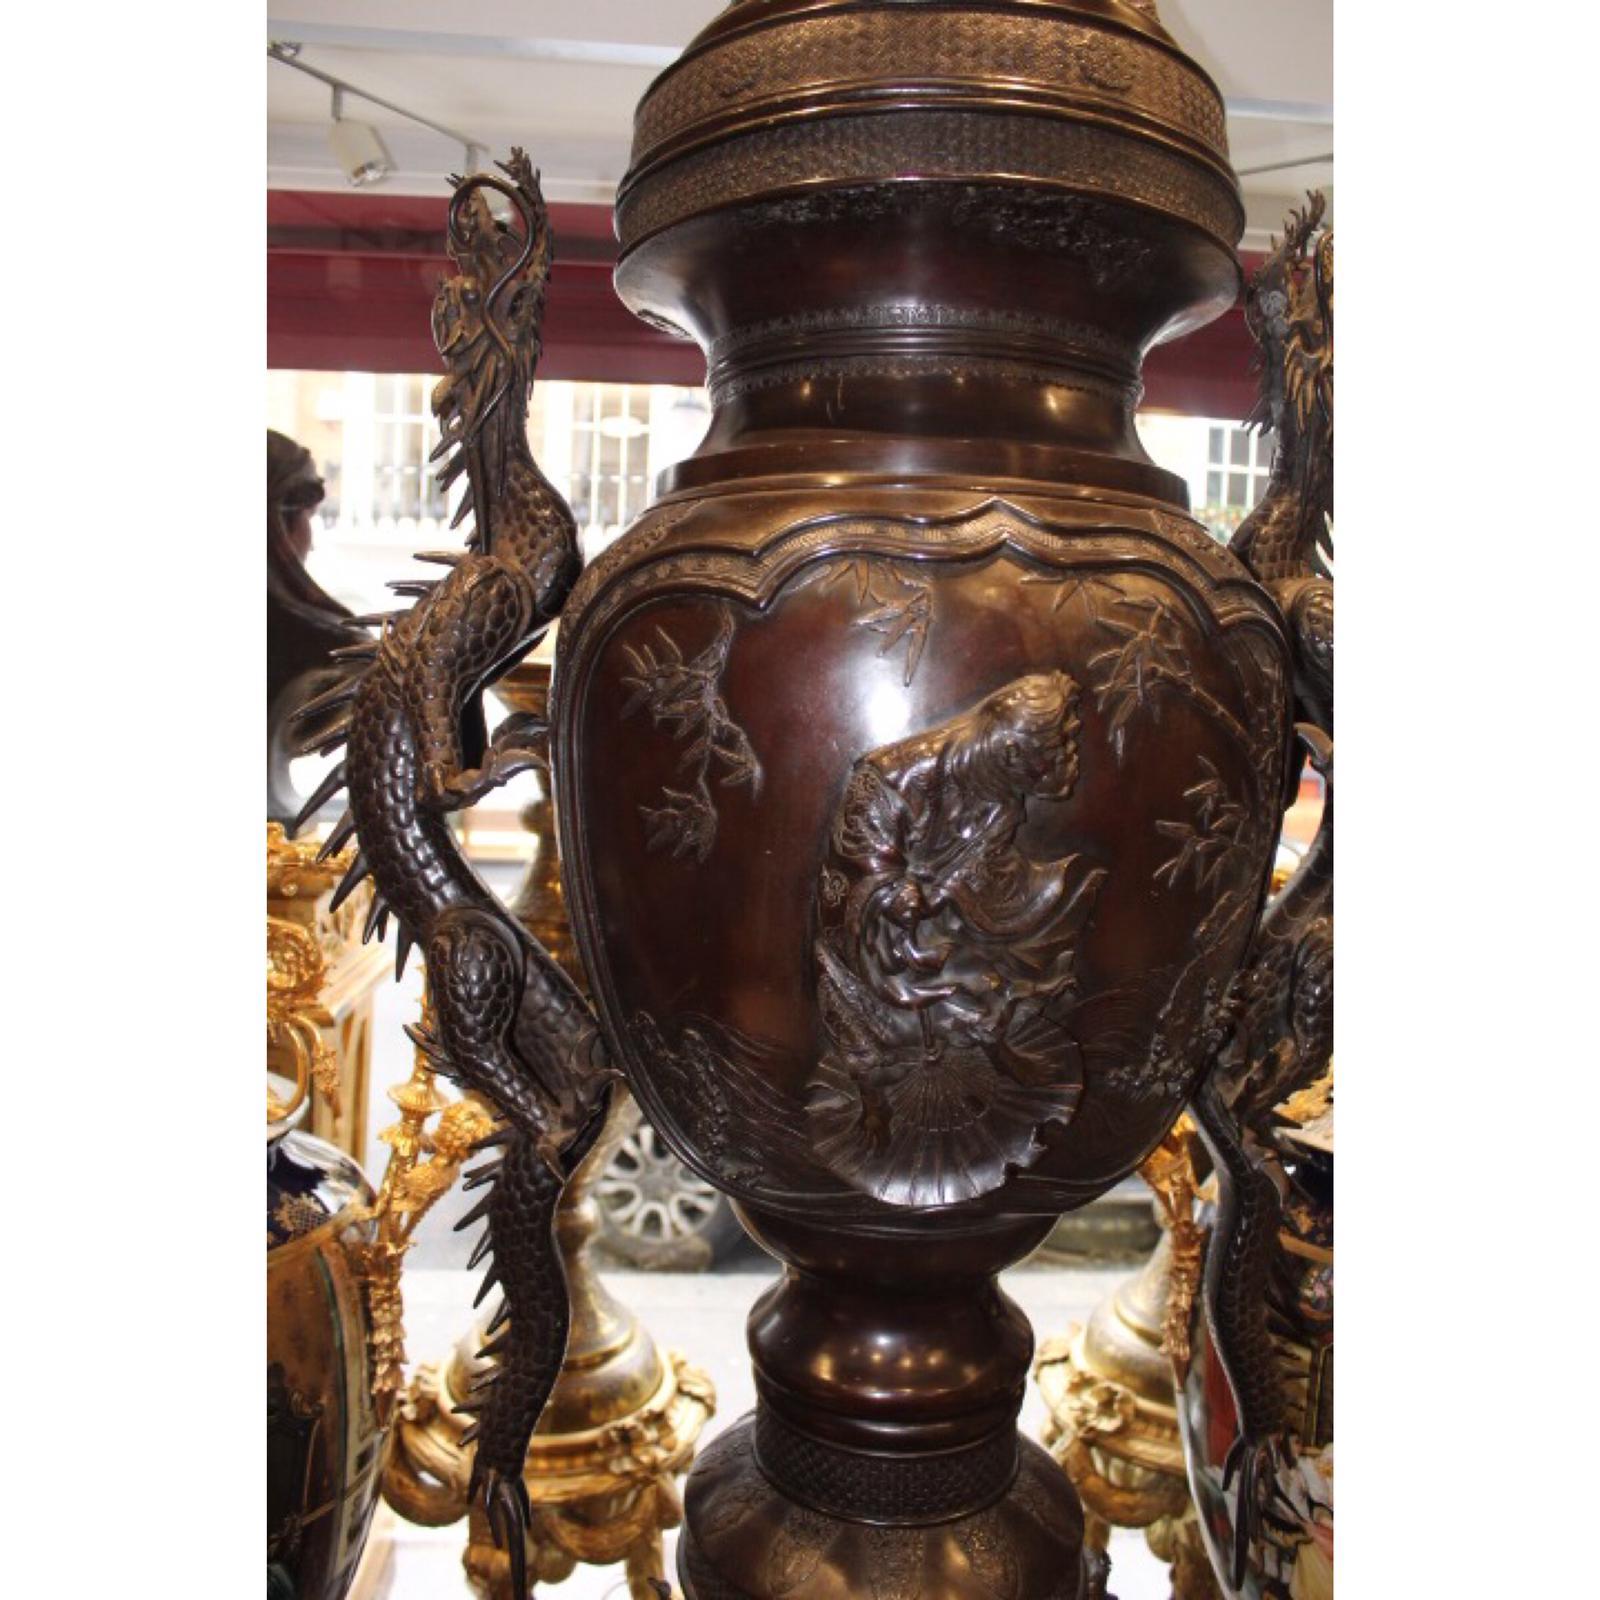 An impressive 240cm x 83cm piece! It is available to view at our shops location if wanting to see it in person. 
It is beautiful decorated with dragons on the sides of the vase, and a magnificent eagle at the top.
The piece is able to come apart